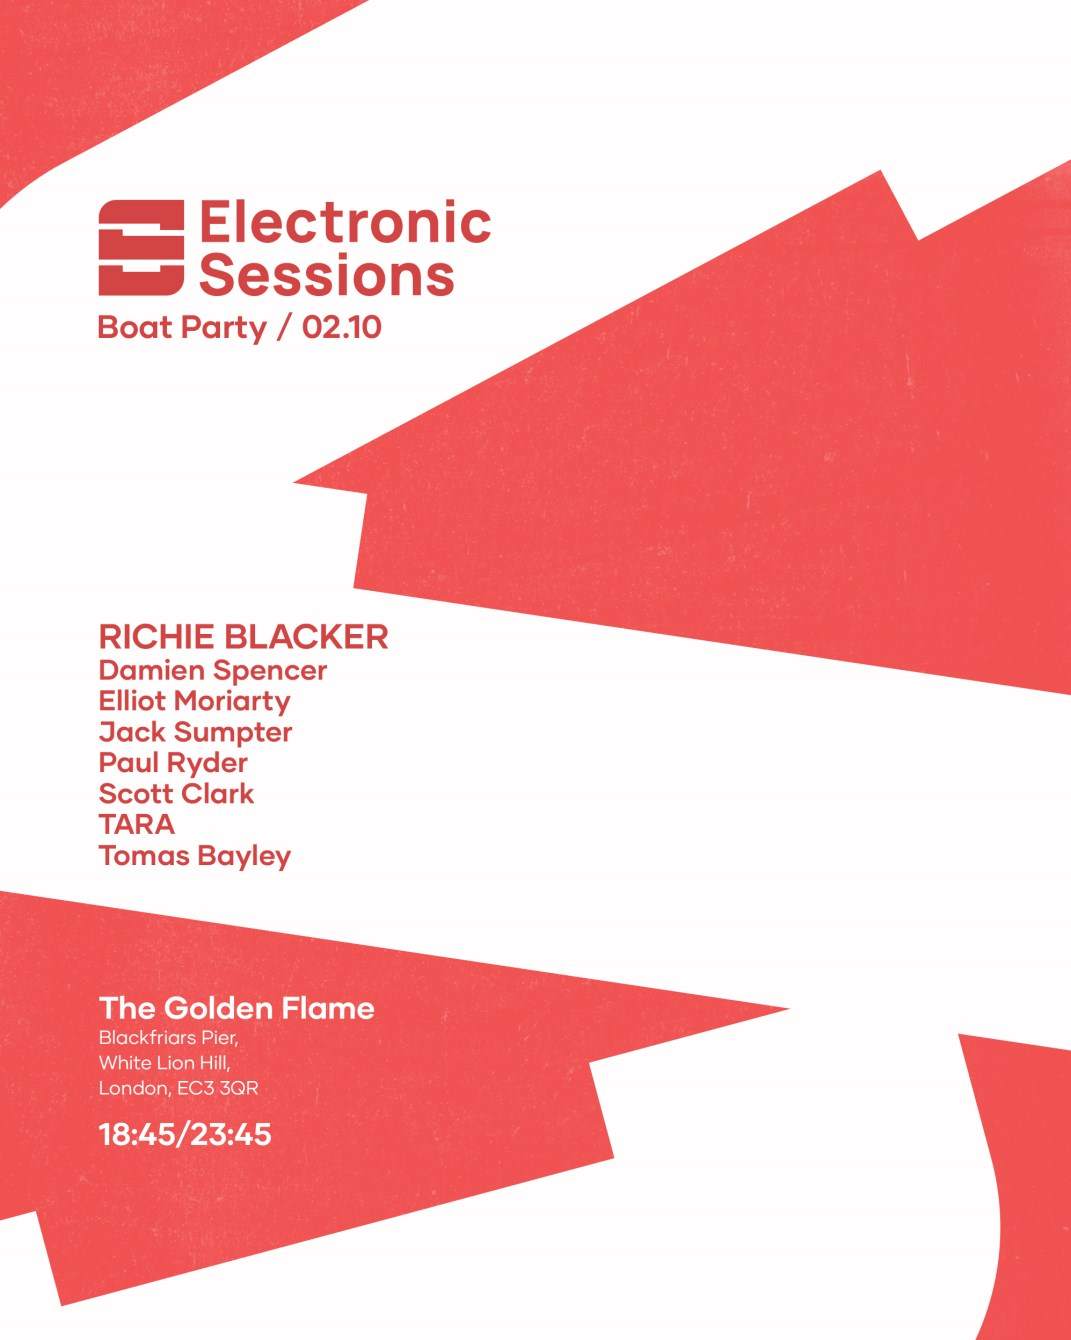 [CANCELLED] Electronic Sessions Boat Party - Richie Blacker - Página frontal